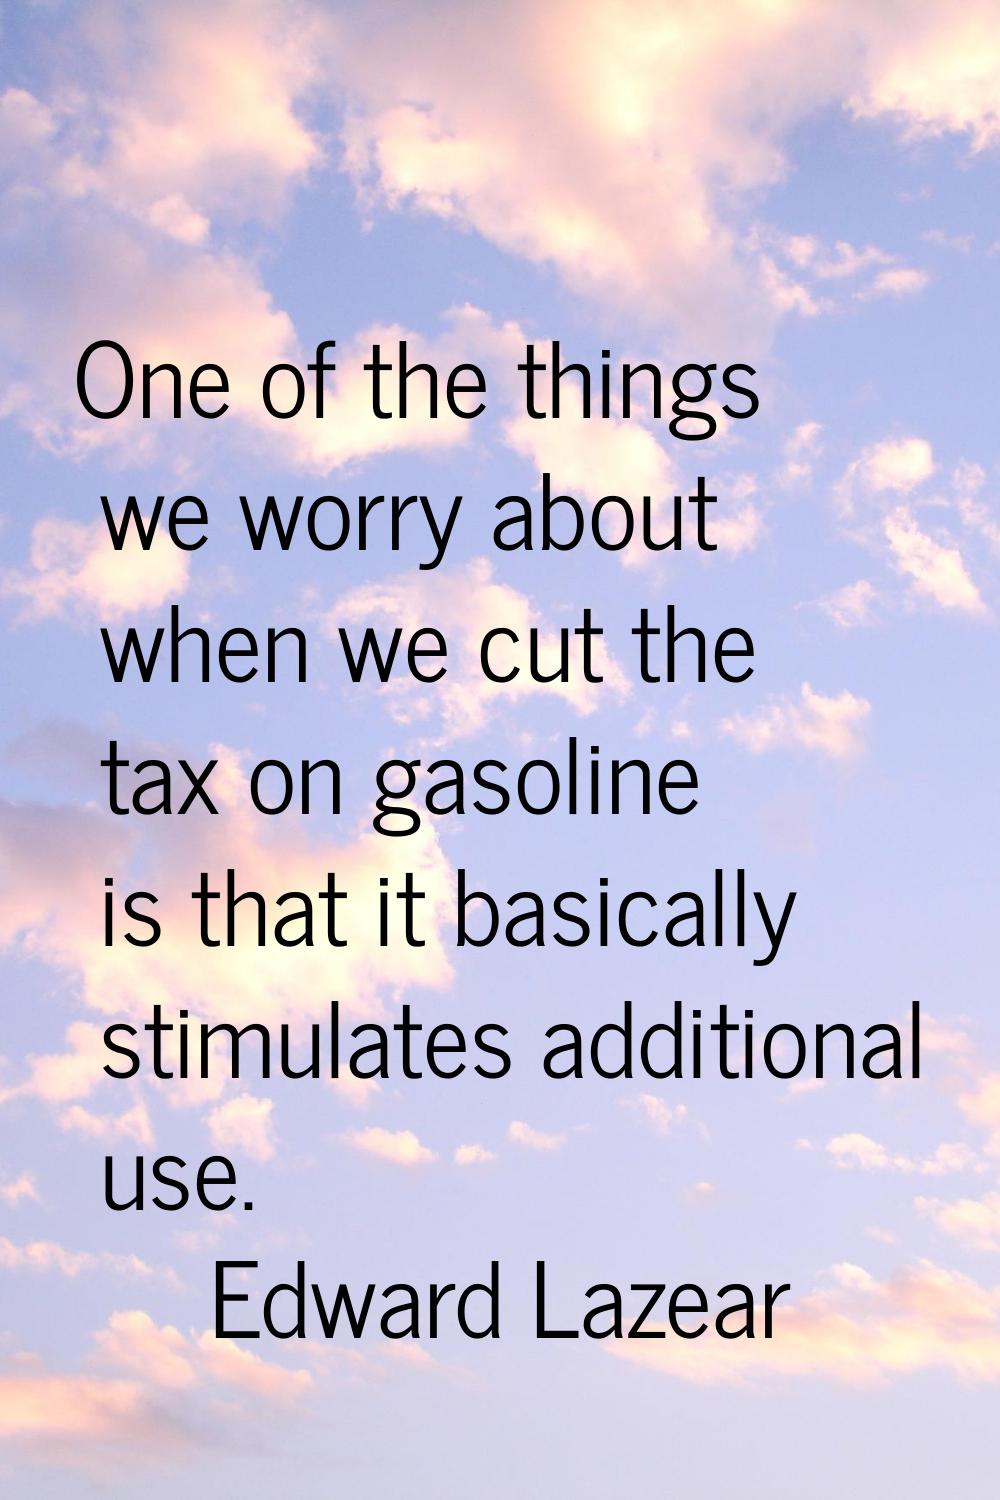 One of the things we worry about when we cut the tax on gasoline is that it basically stimulates ad